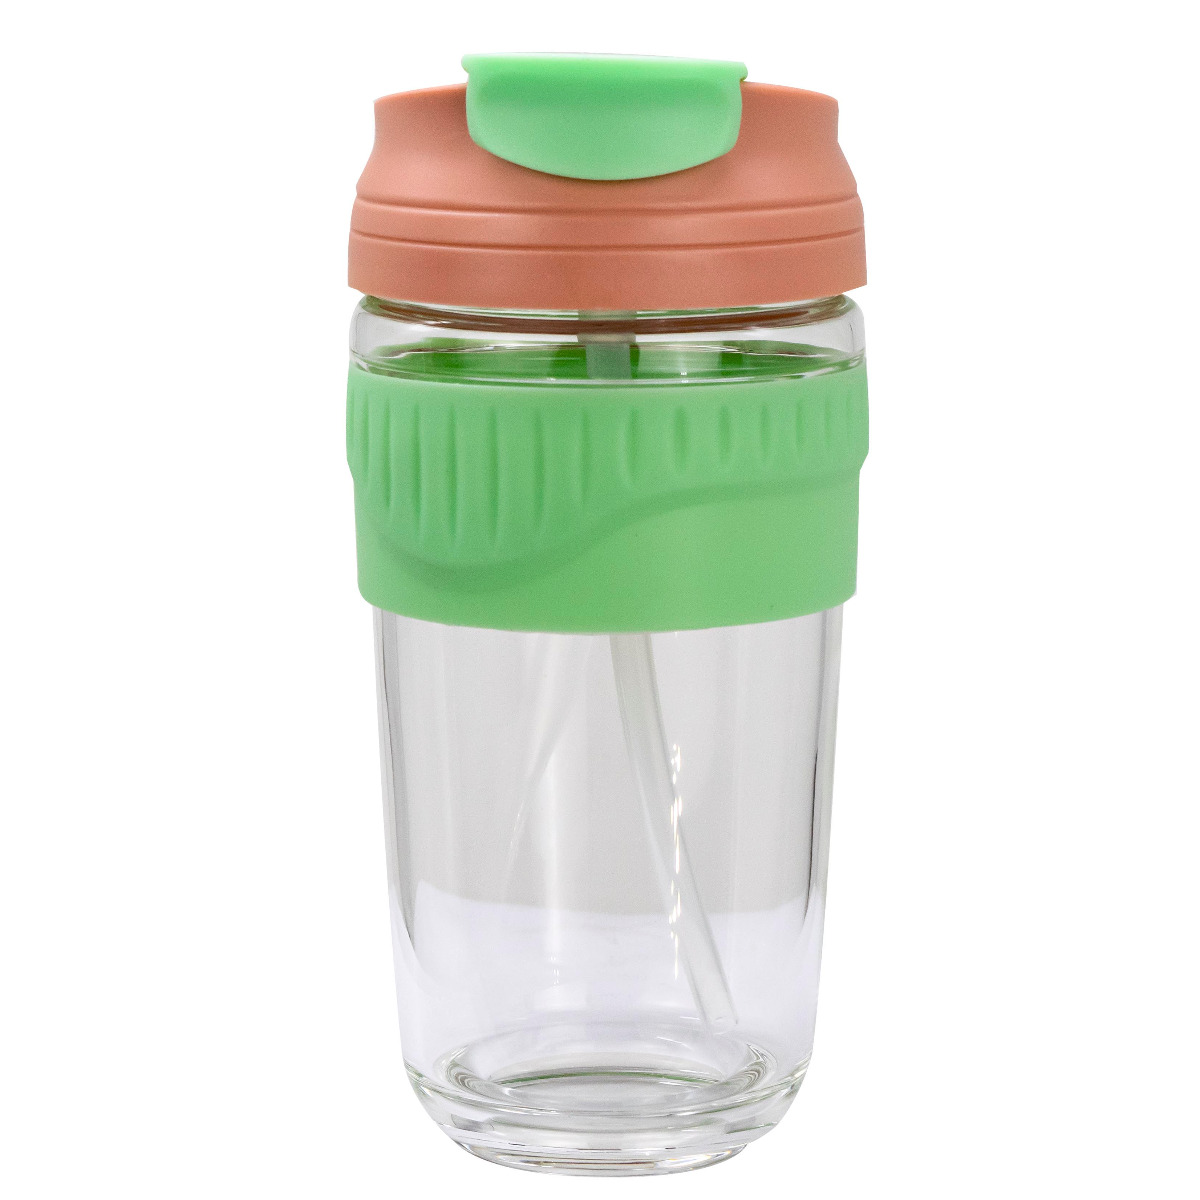 Coffee glass cup rubber holder e-371 550ml green